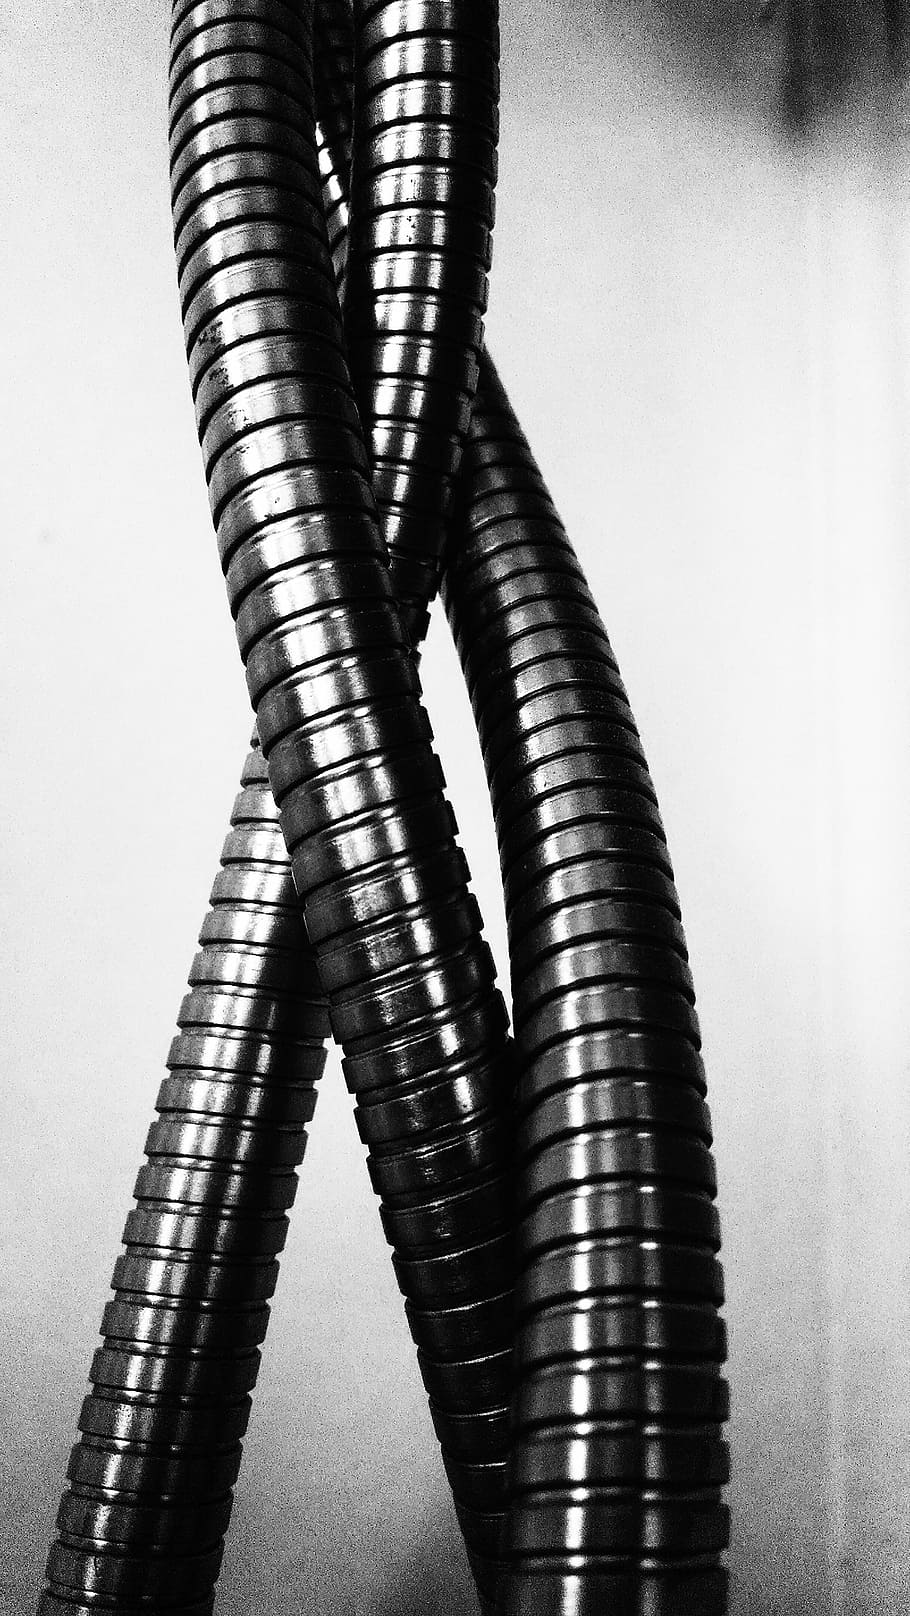 grayscale photo, hose, metal, coil, modern, industrial, iron, equipment, wire, spiral